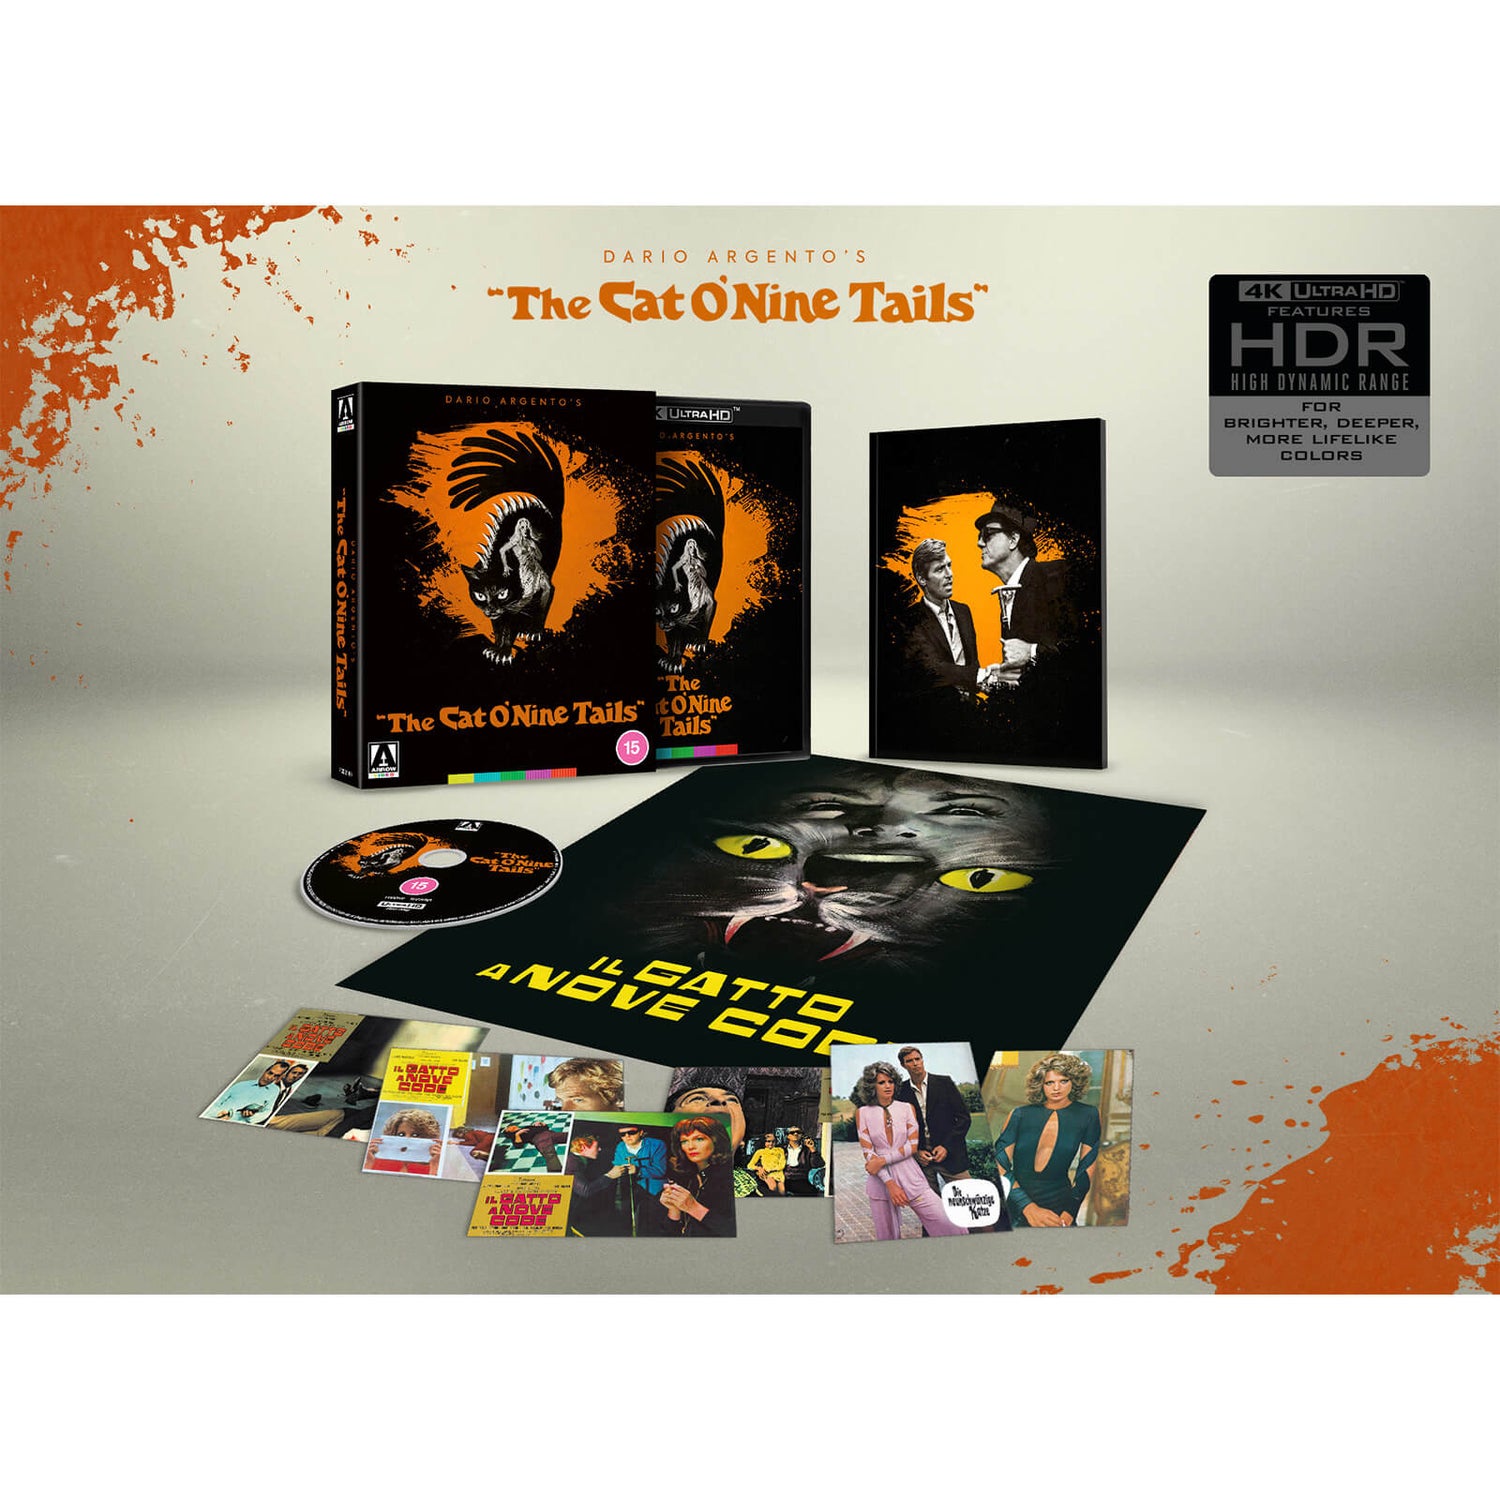 The Cat O' Nine Tails Limited Edition 4K Ultra HD